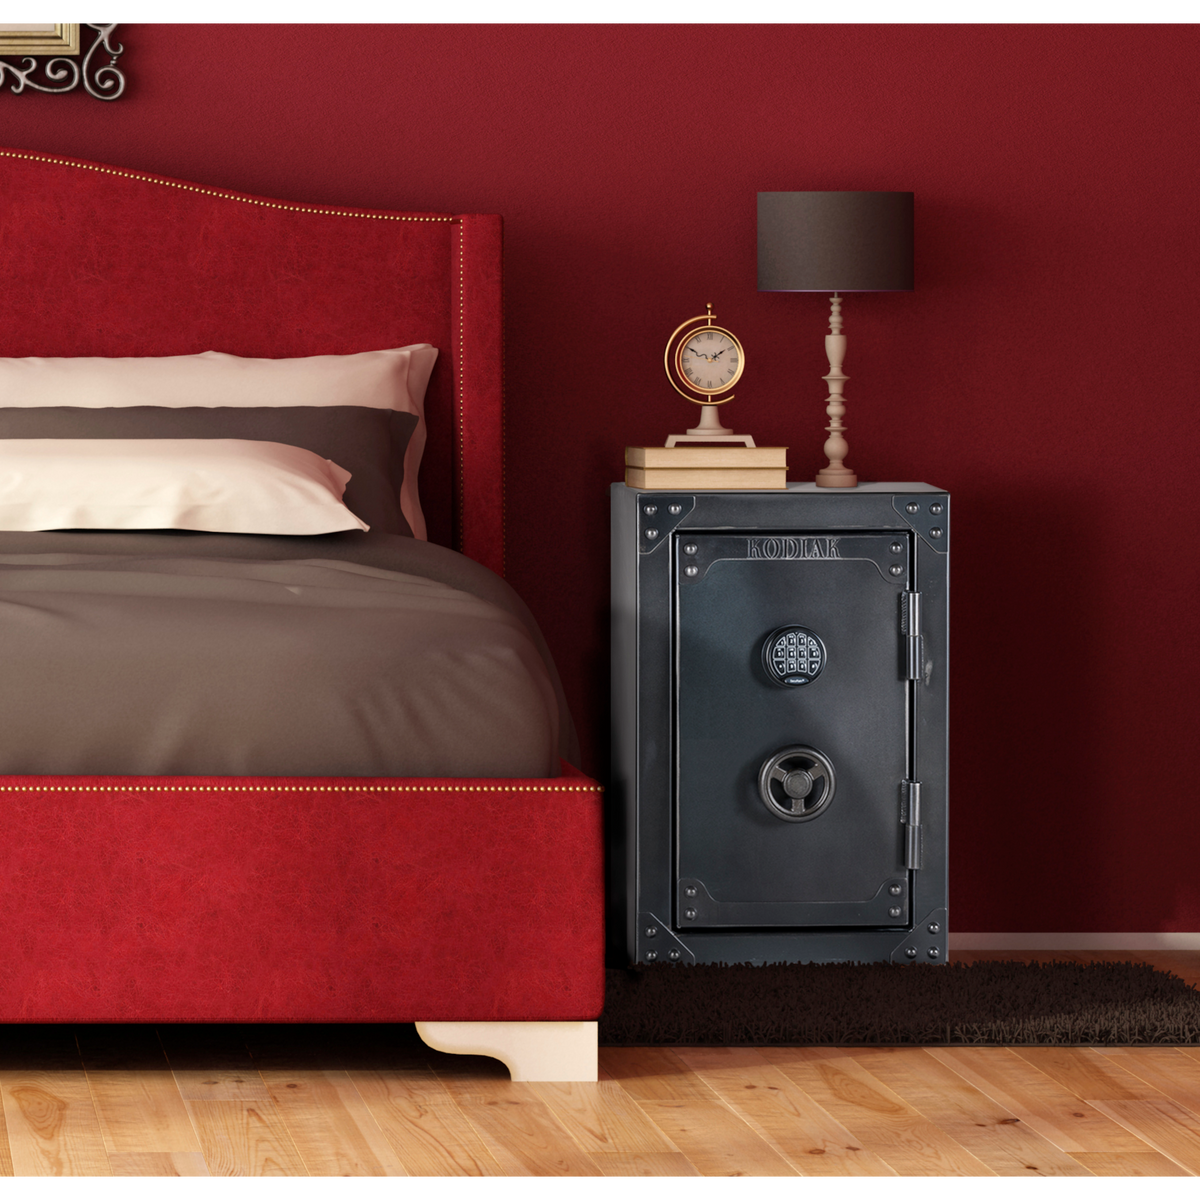 Kodiak KSB3020E Door Closed with Lamp 2 Books and Clock on top. Pictured in a red bedroom on the right side of the bed.